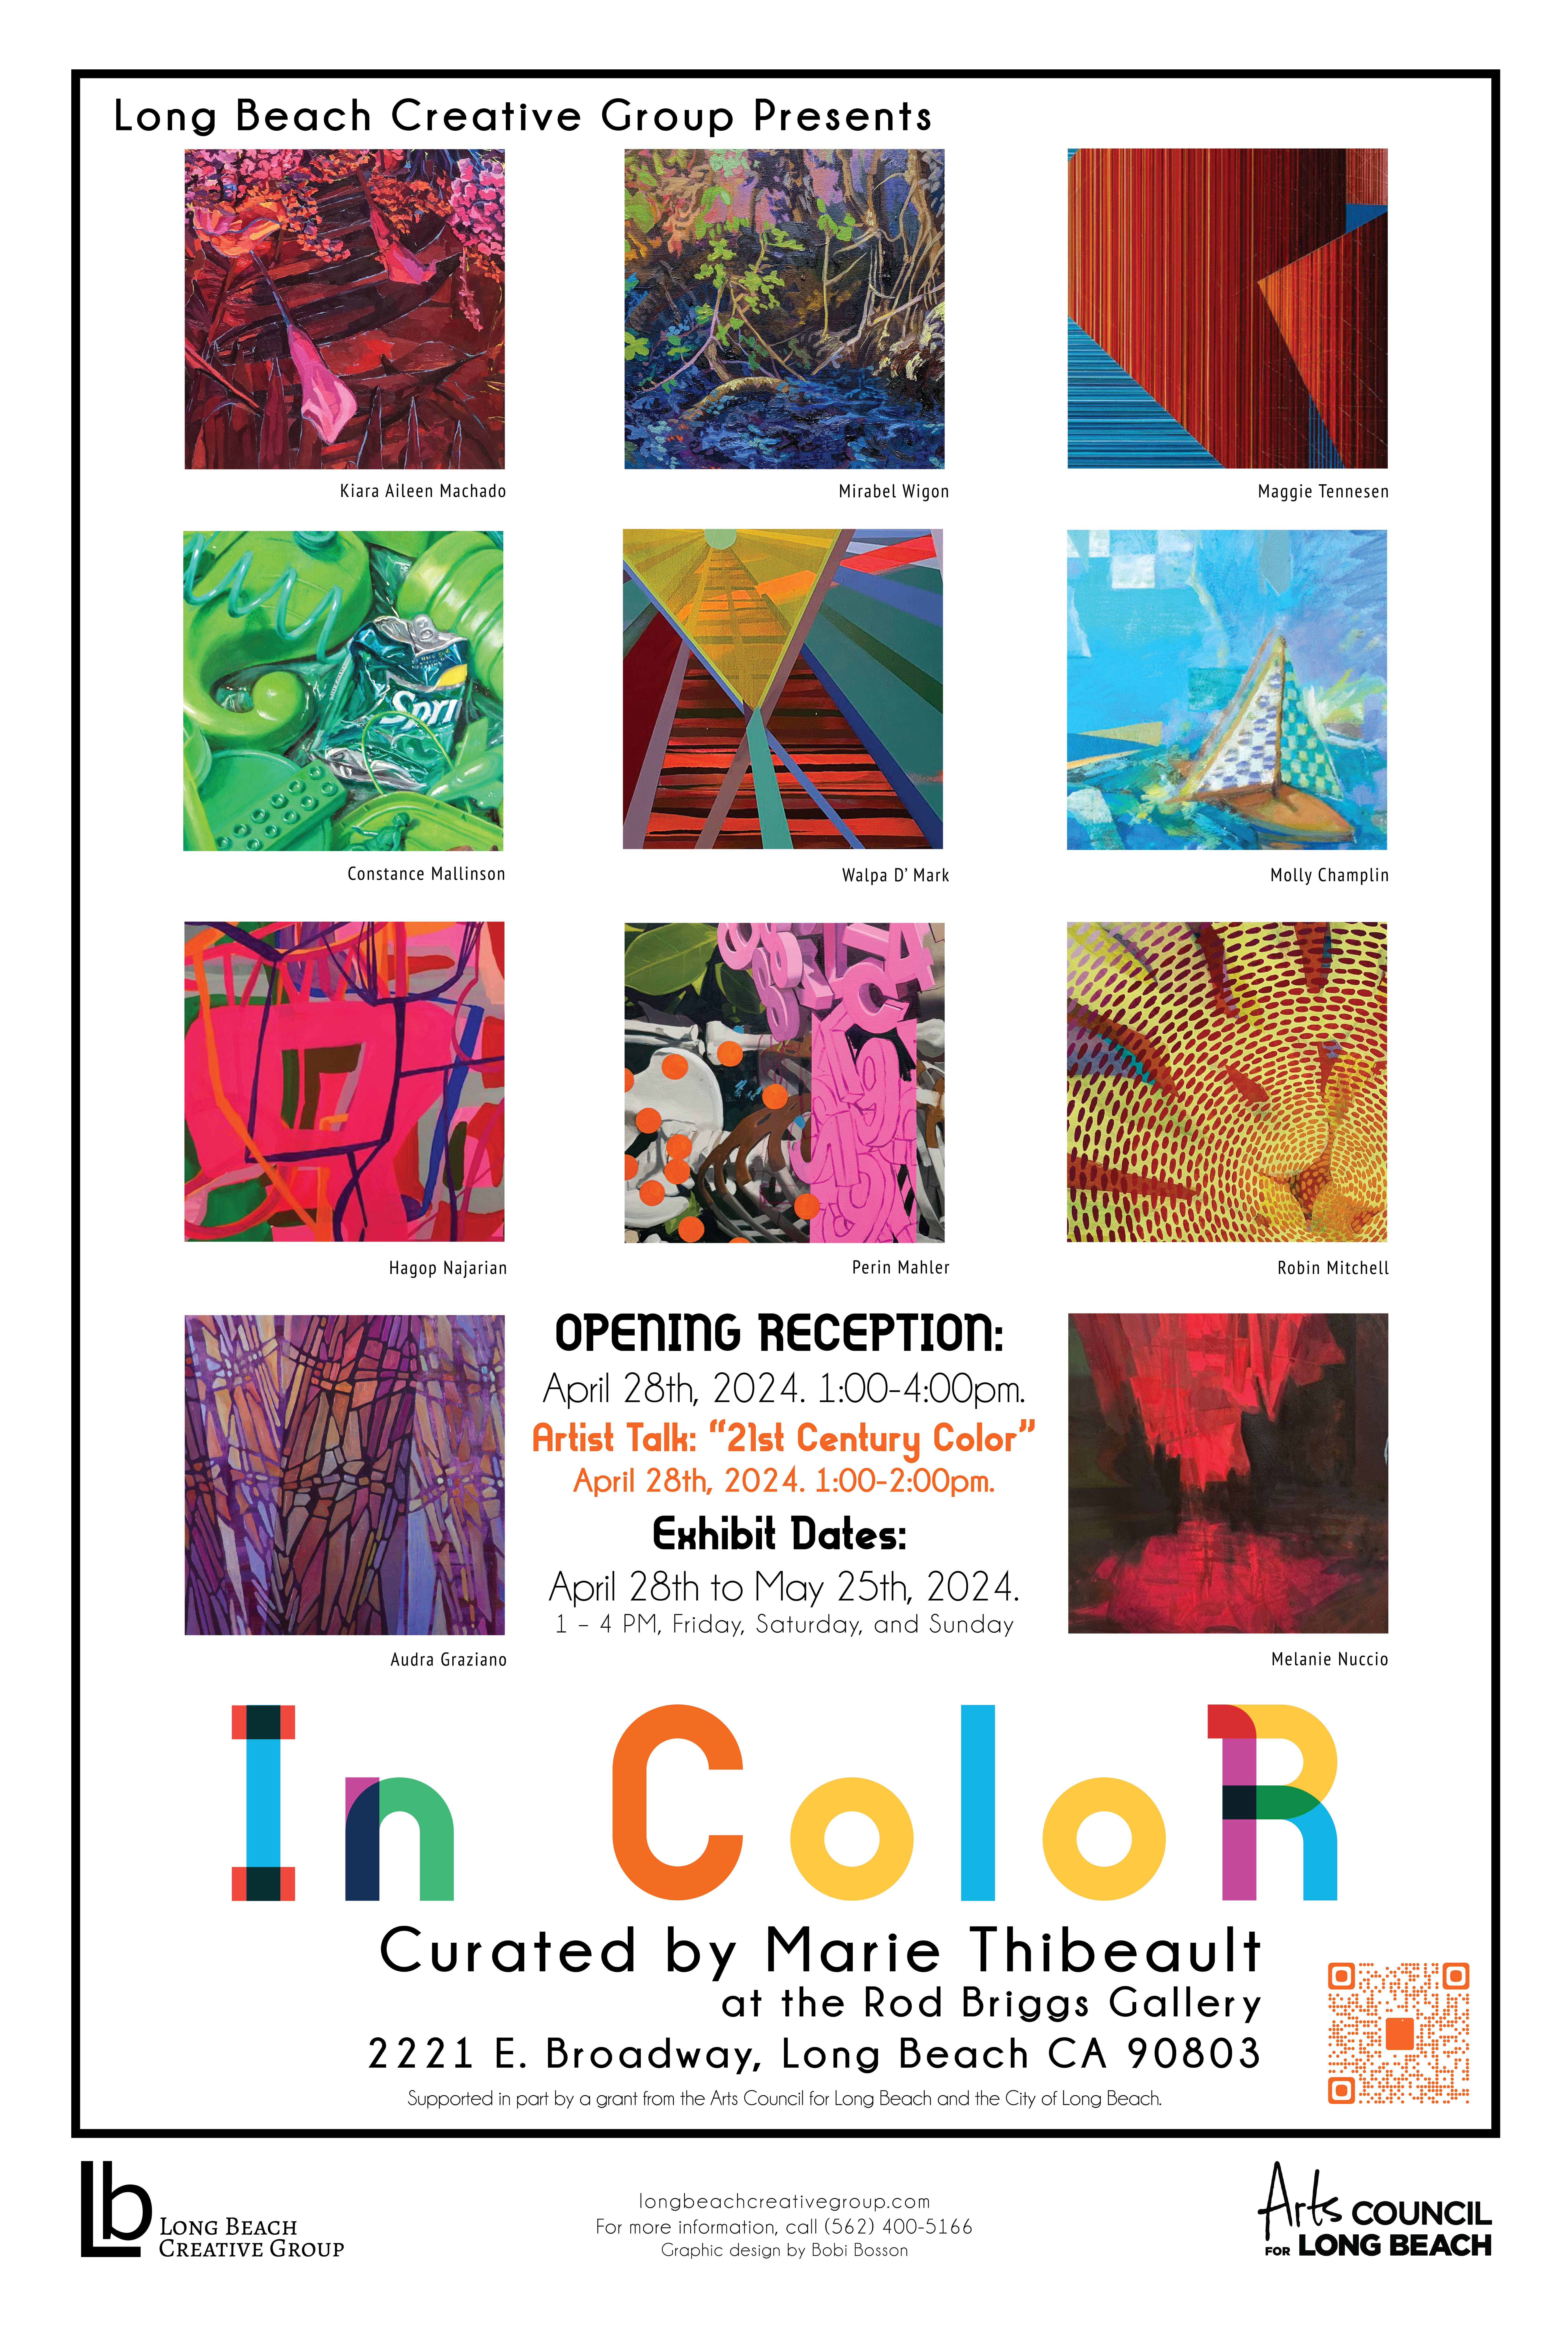 ‘In Color’ Art Exhibition curated by Marie Thibeault